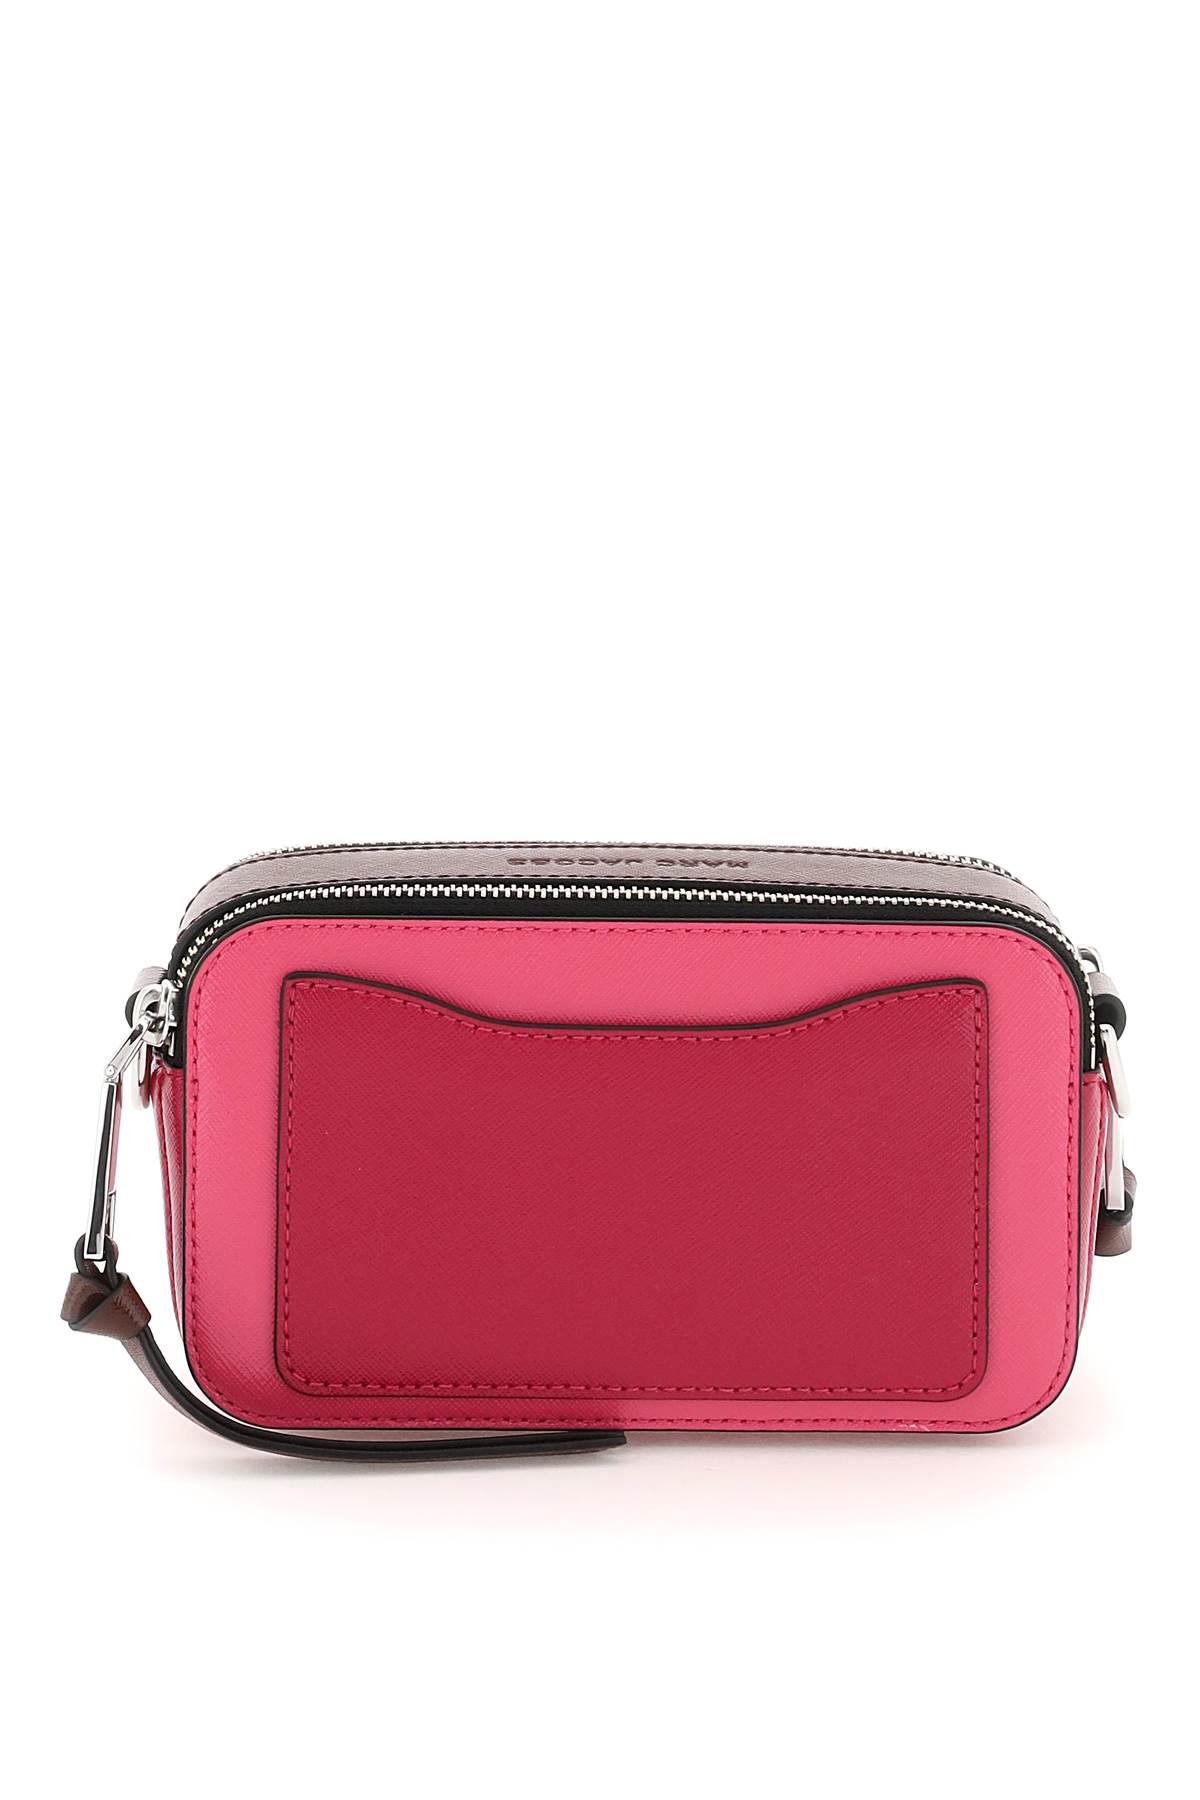 Marc Jacobs Snapshot Mini Compact Wallet Magenta Multi One Size